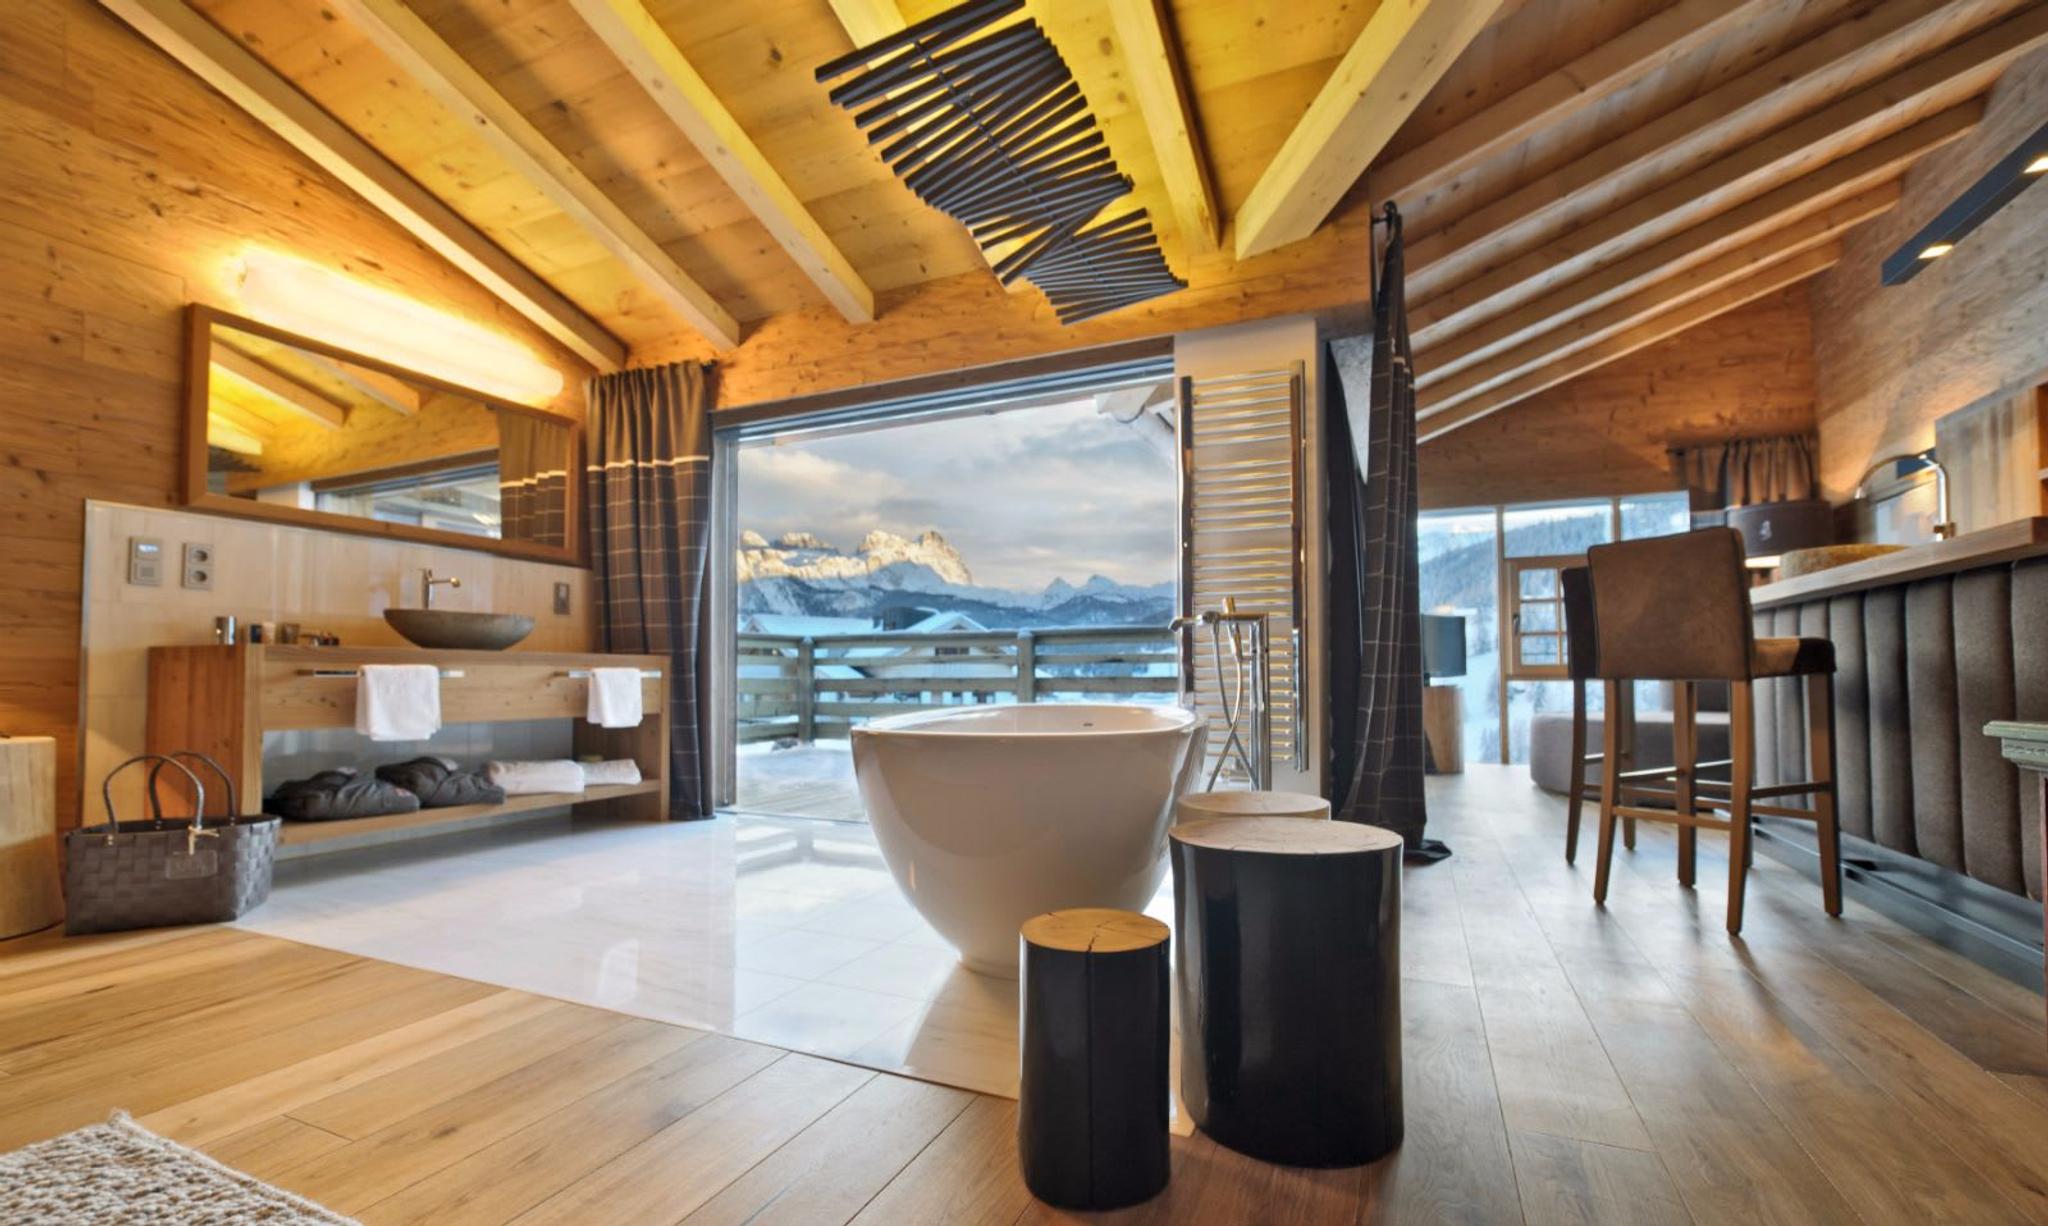 Chalet Cil's bathroom in Lasa Marble facing the panoramic wooden terrace